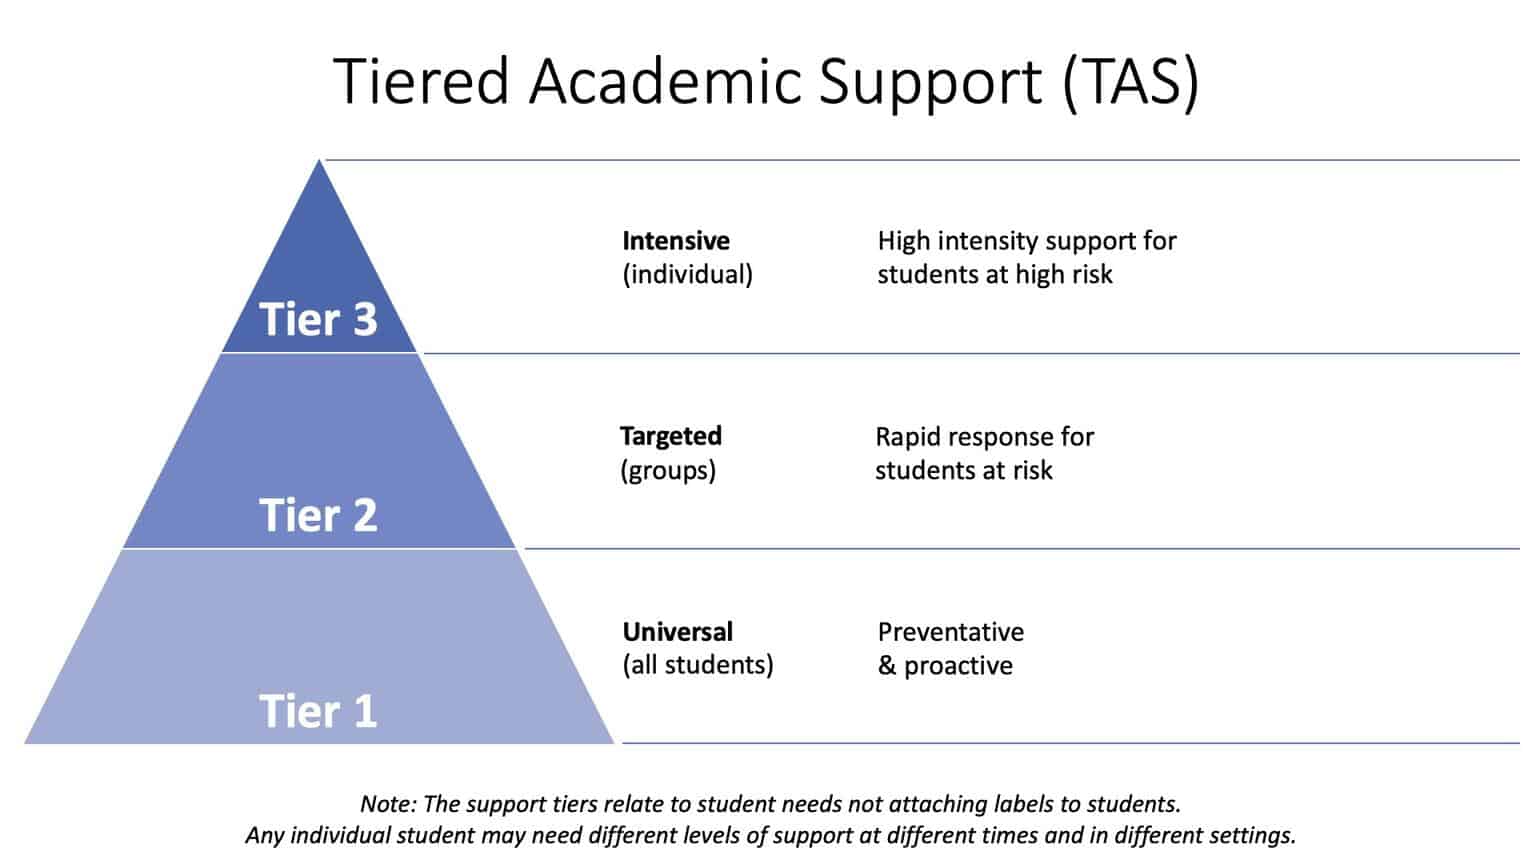 Tiered Academic Support (TAS) at WSSC